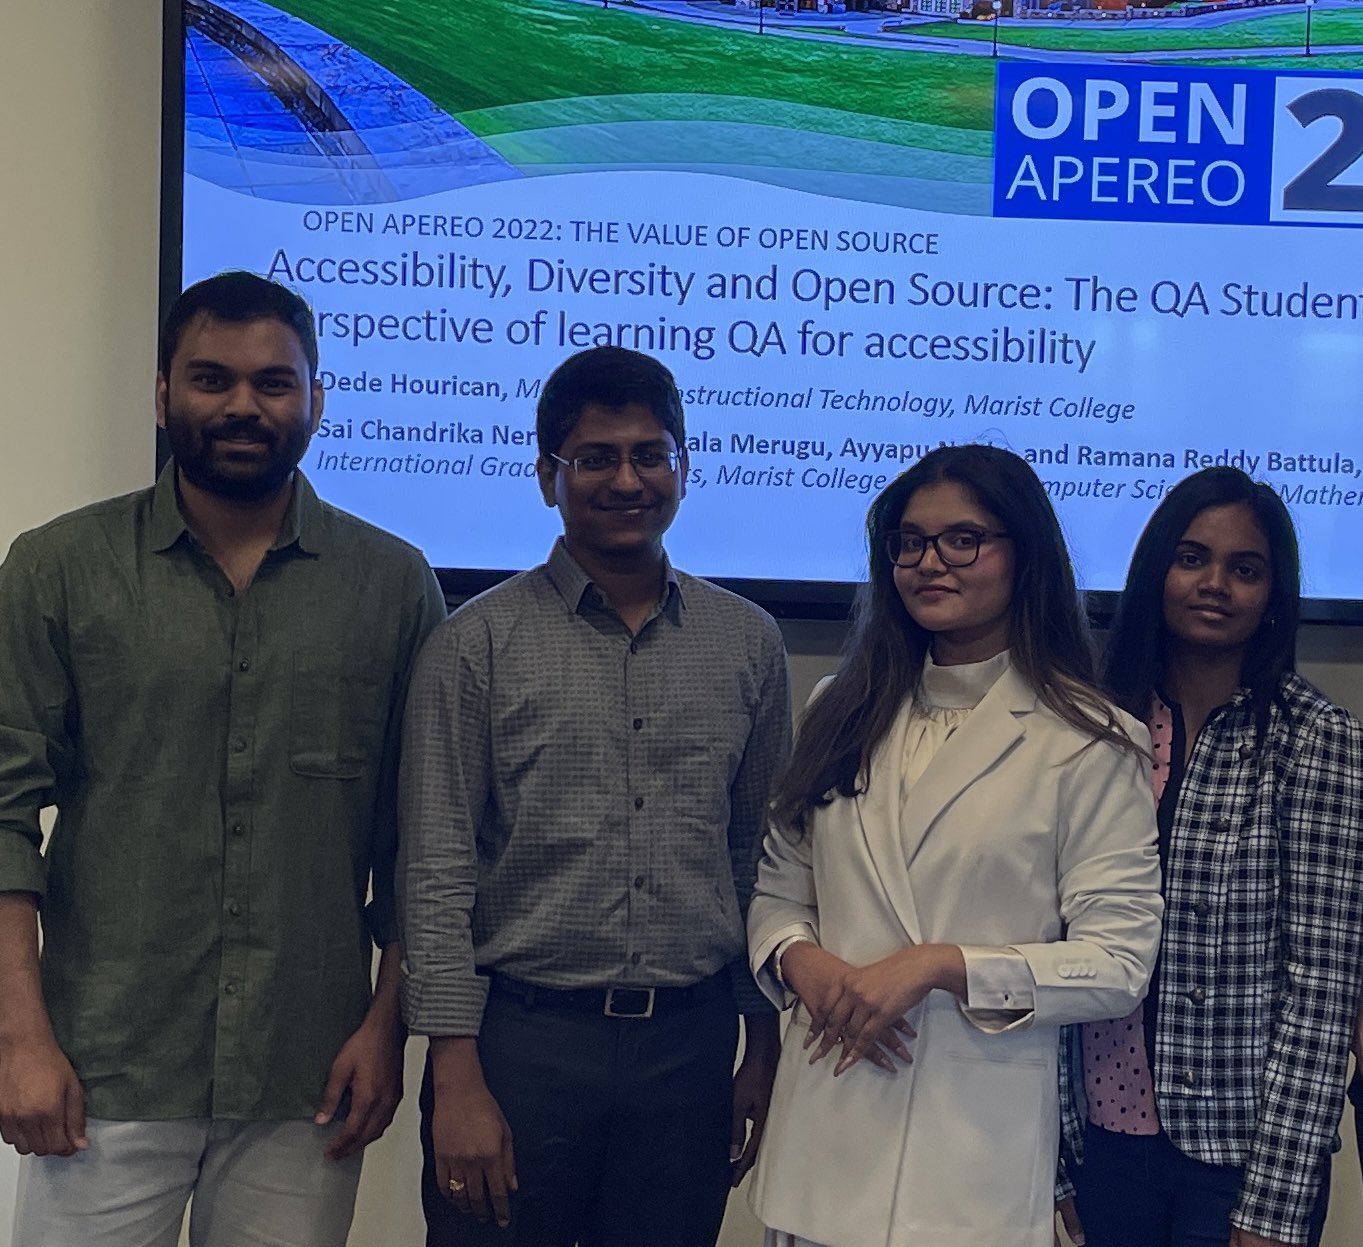 An image of the Digital Education students presenting at Open Apereo 2022